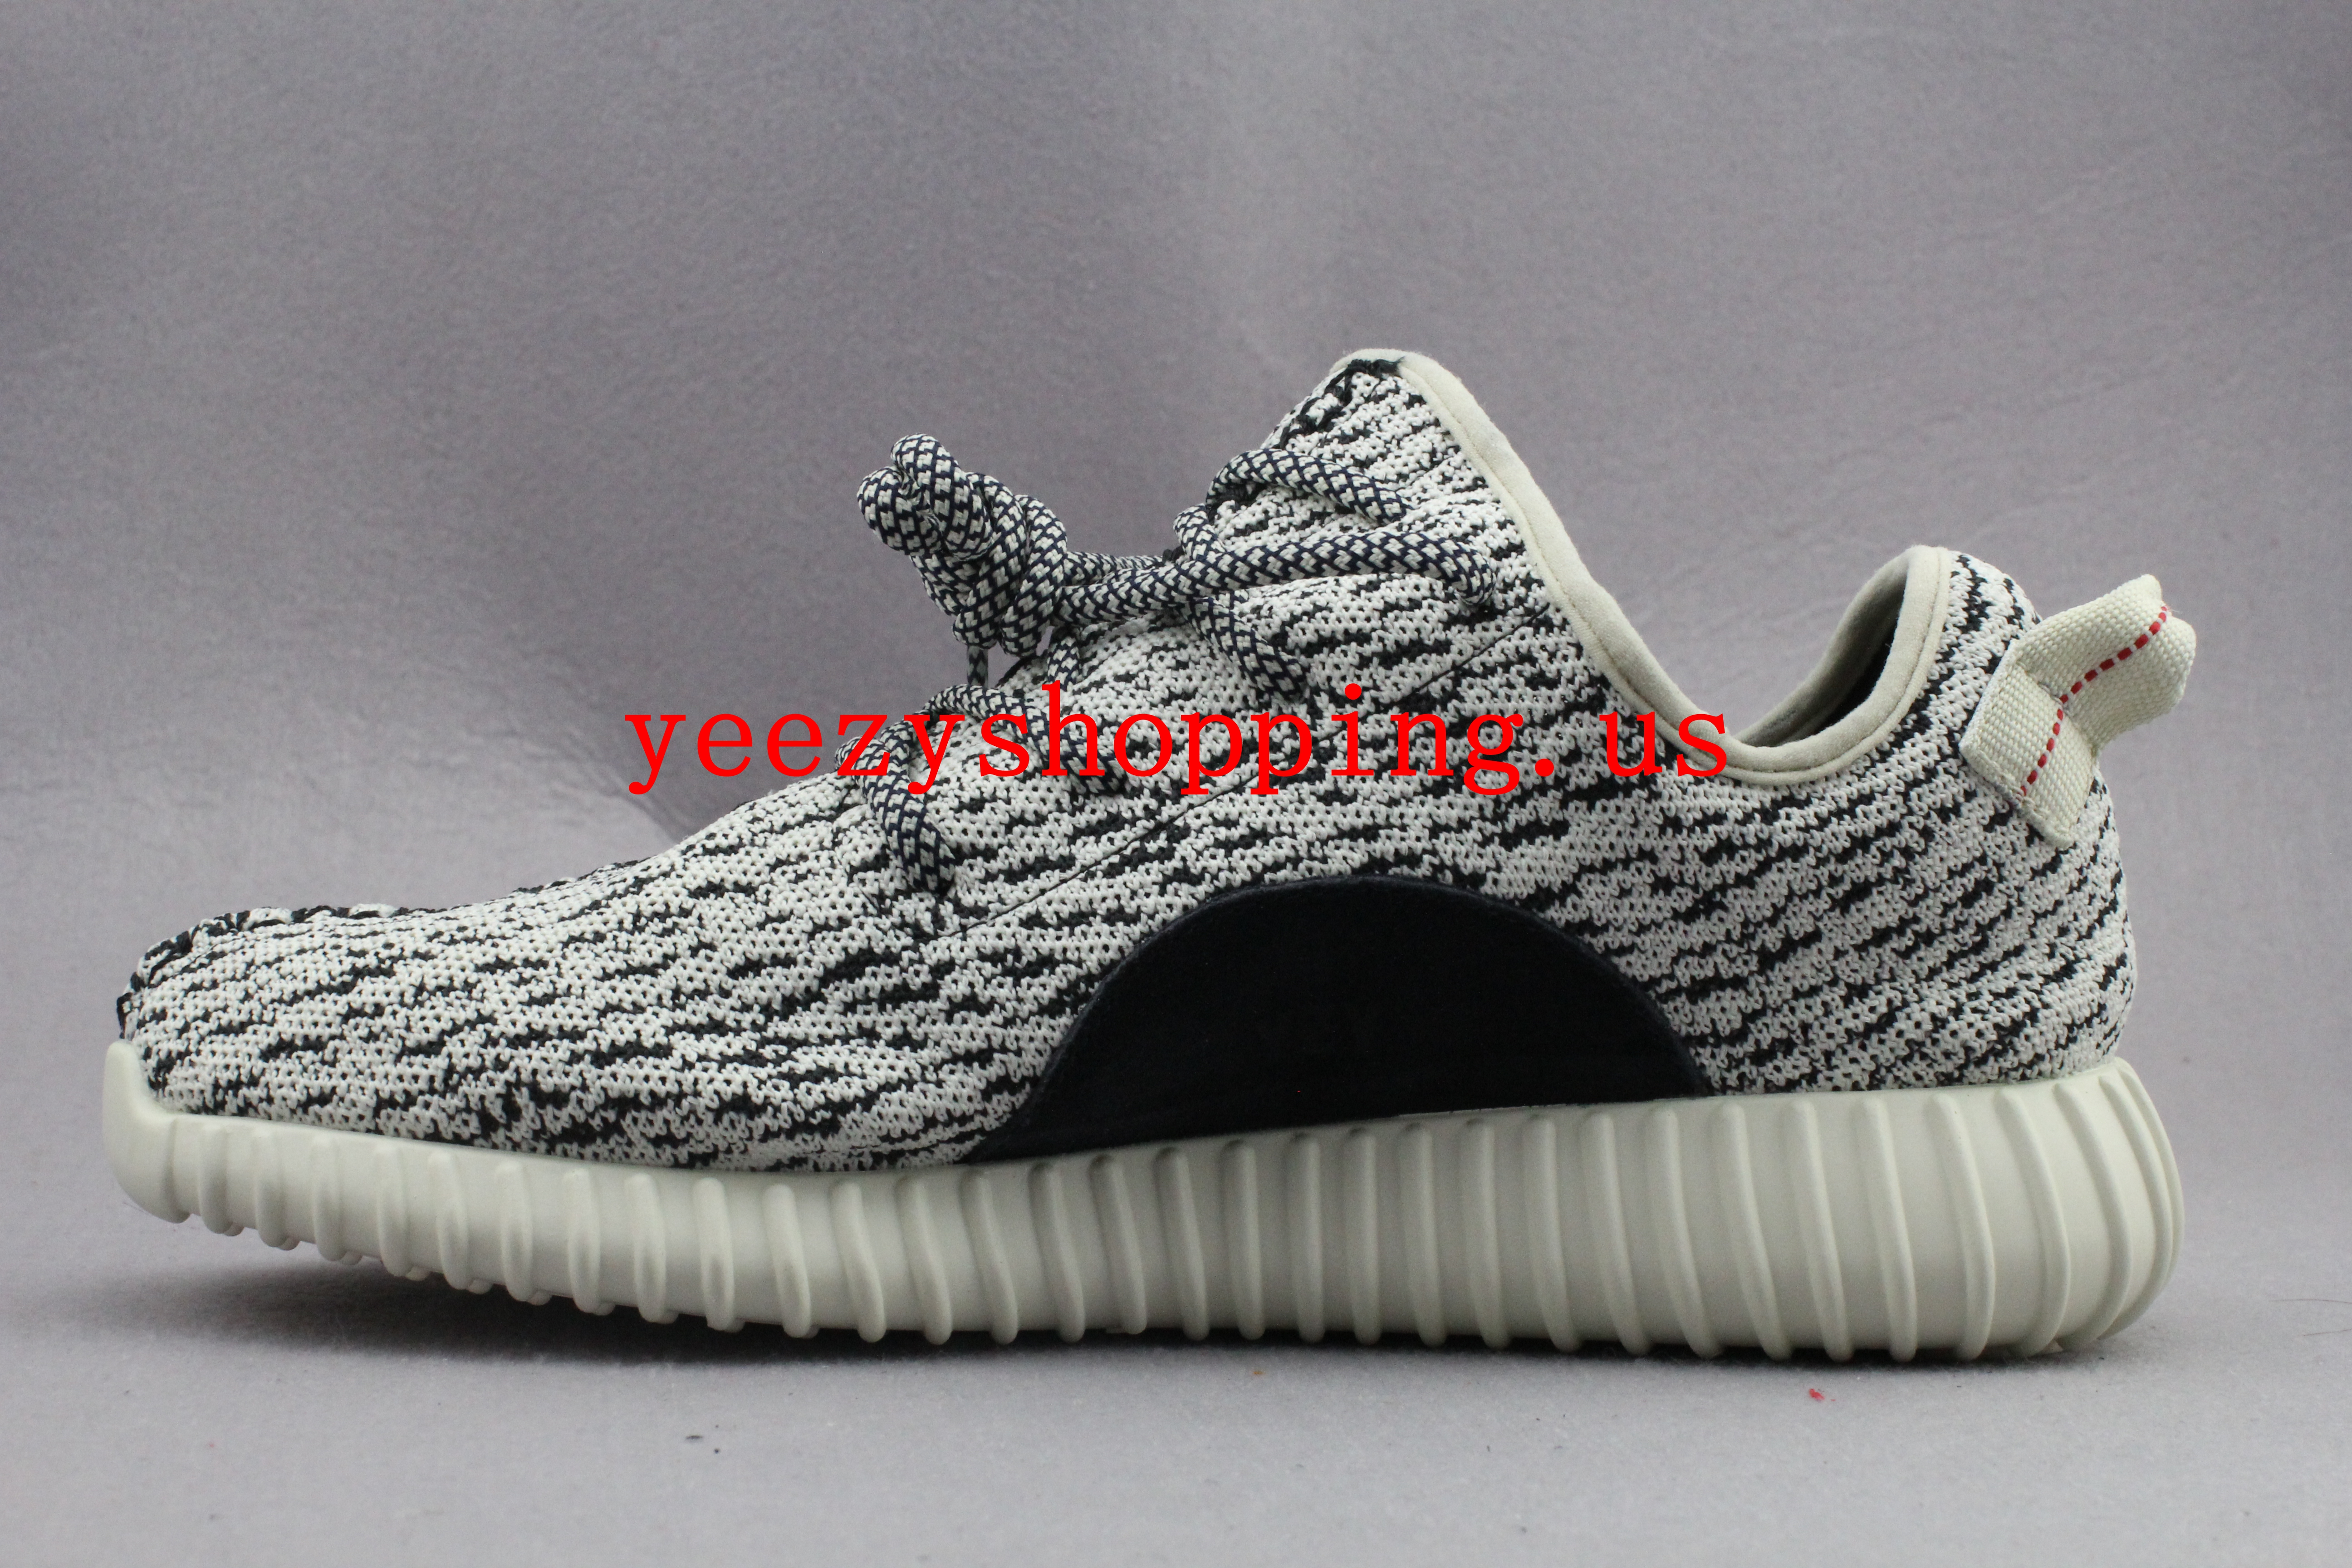 yeezy boost dhgate